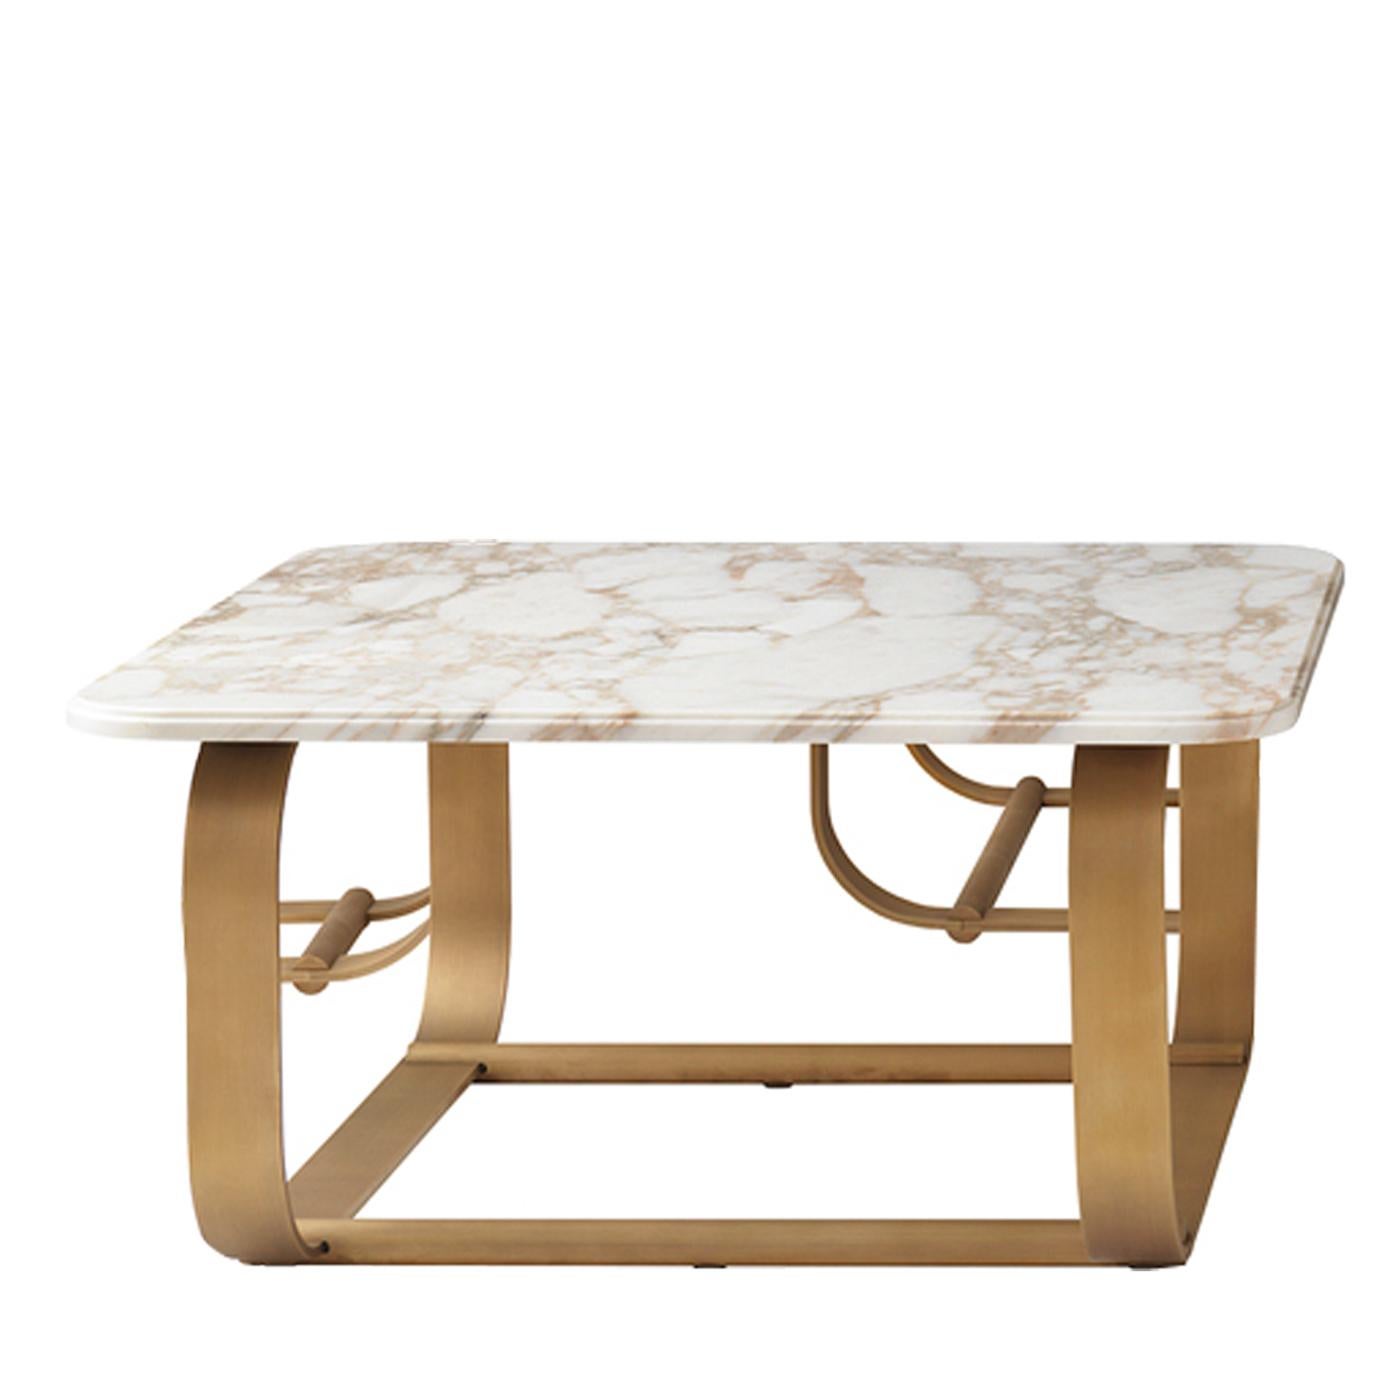 Stylish and functional, the Buddha bar coffee table will enhance any room with its sophisticated charm. The structure of the base is finished in burnished brass and features rounded corners for a softer, more welcoming look. The top is crafted from